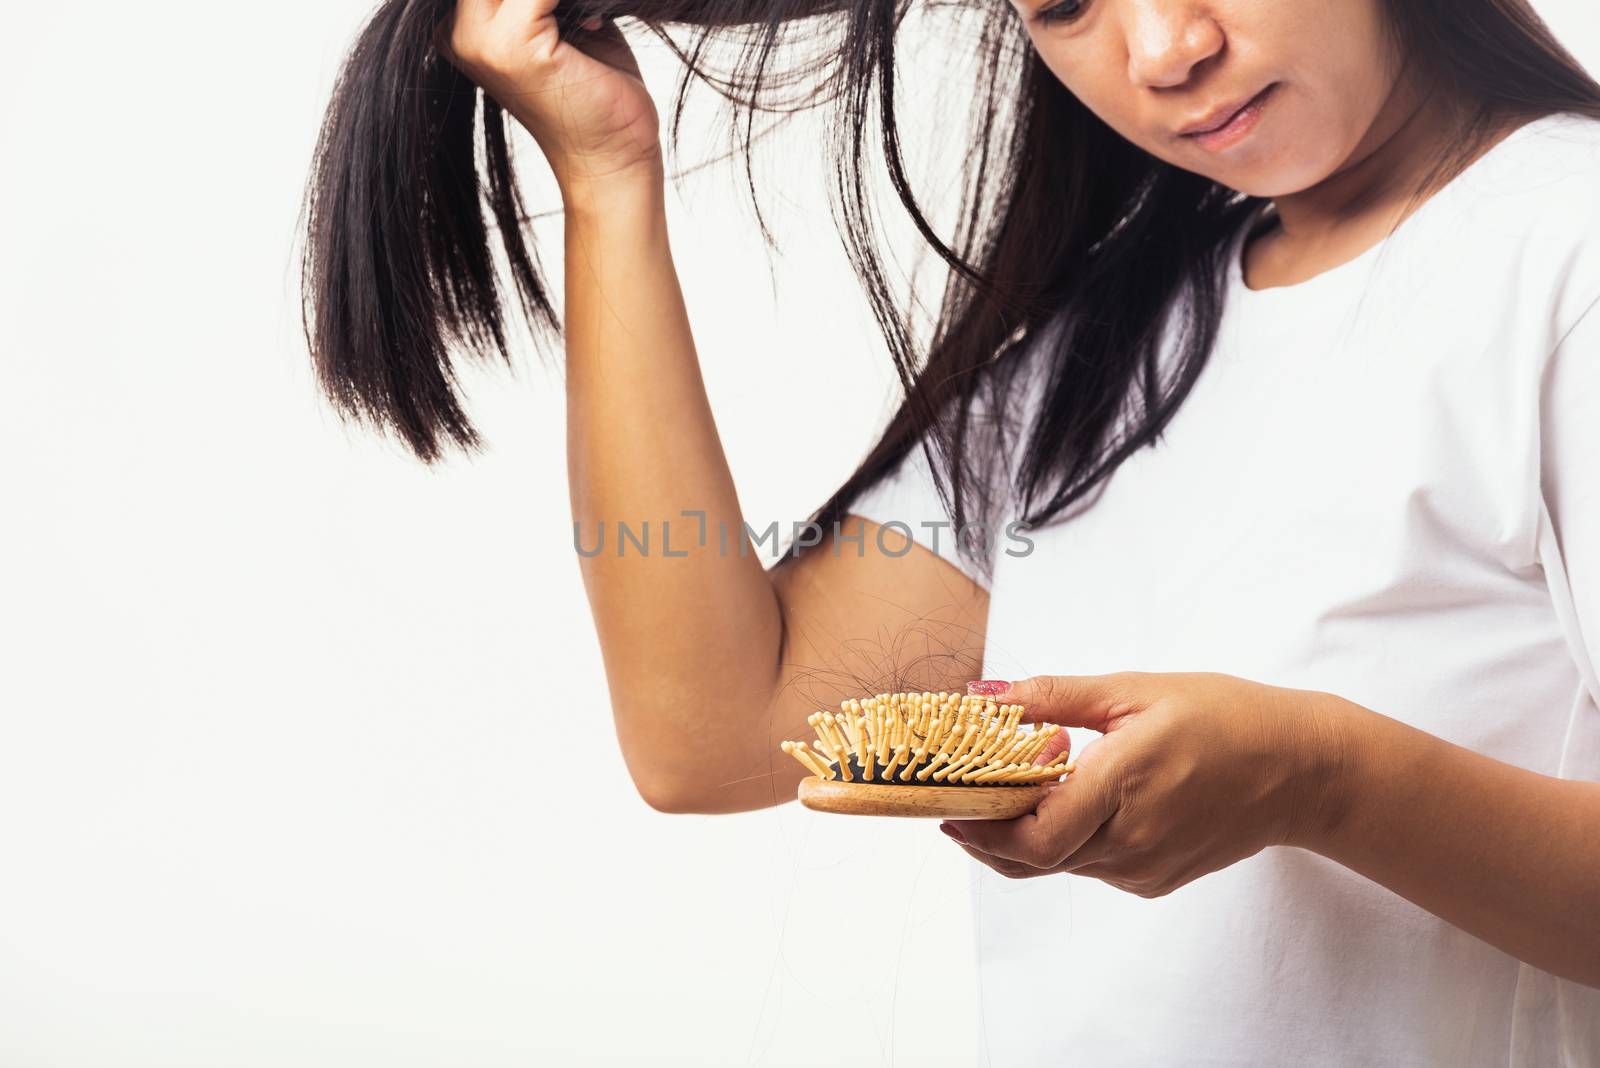 Woman weak hair her hold hairbrush with damaged long loss hair i by Sorapop